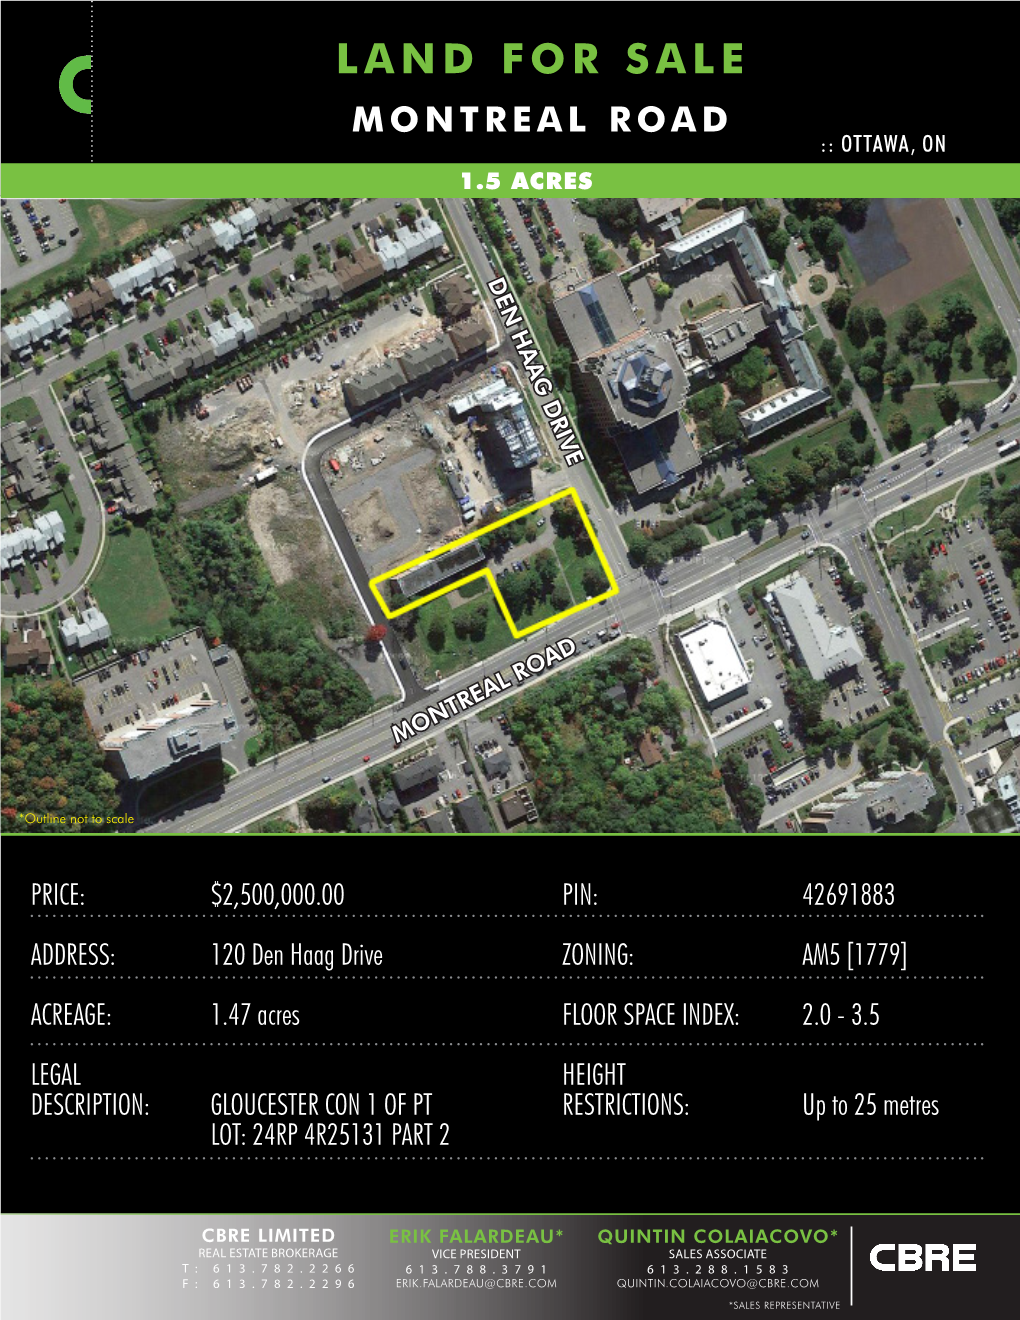 Land for Sale Montreal Road :: Ottawa, on 1.5 Acres